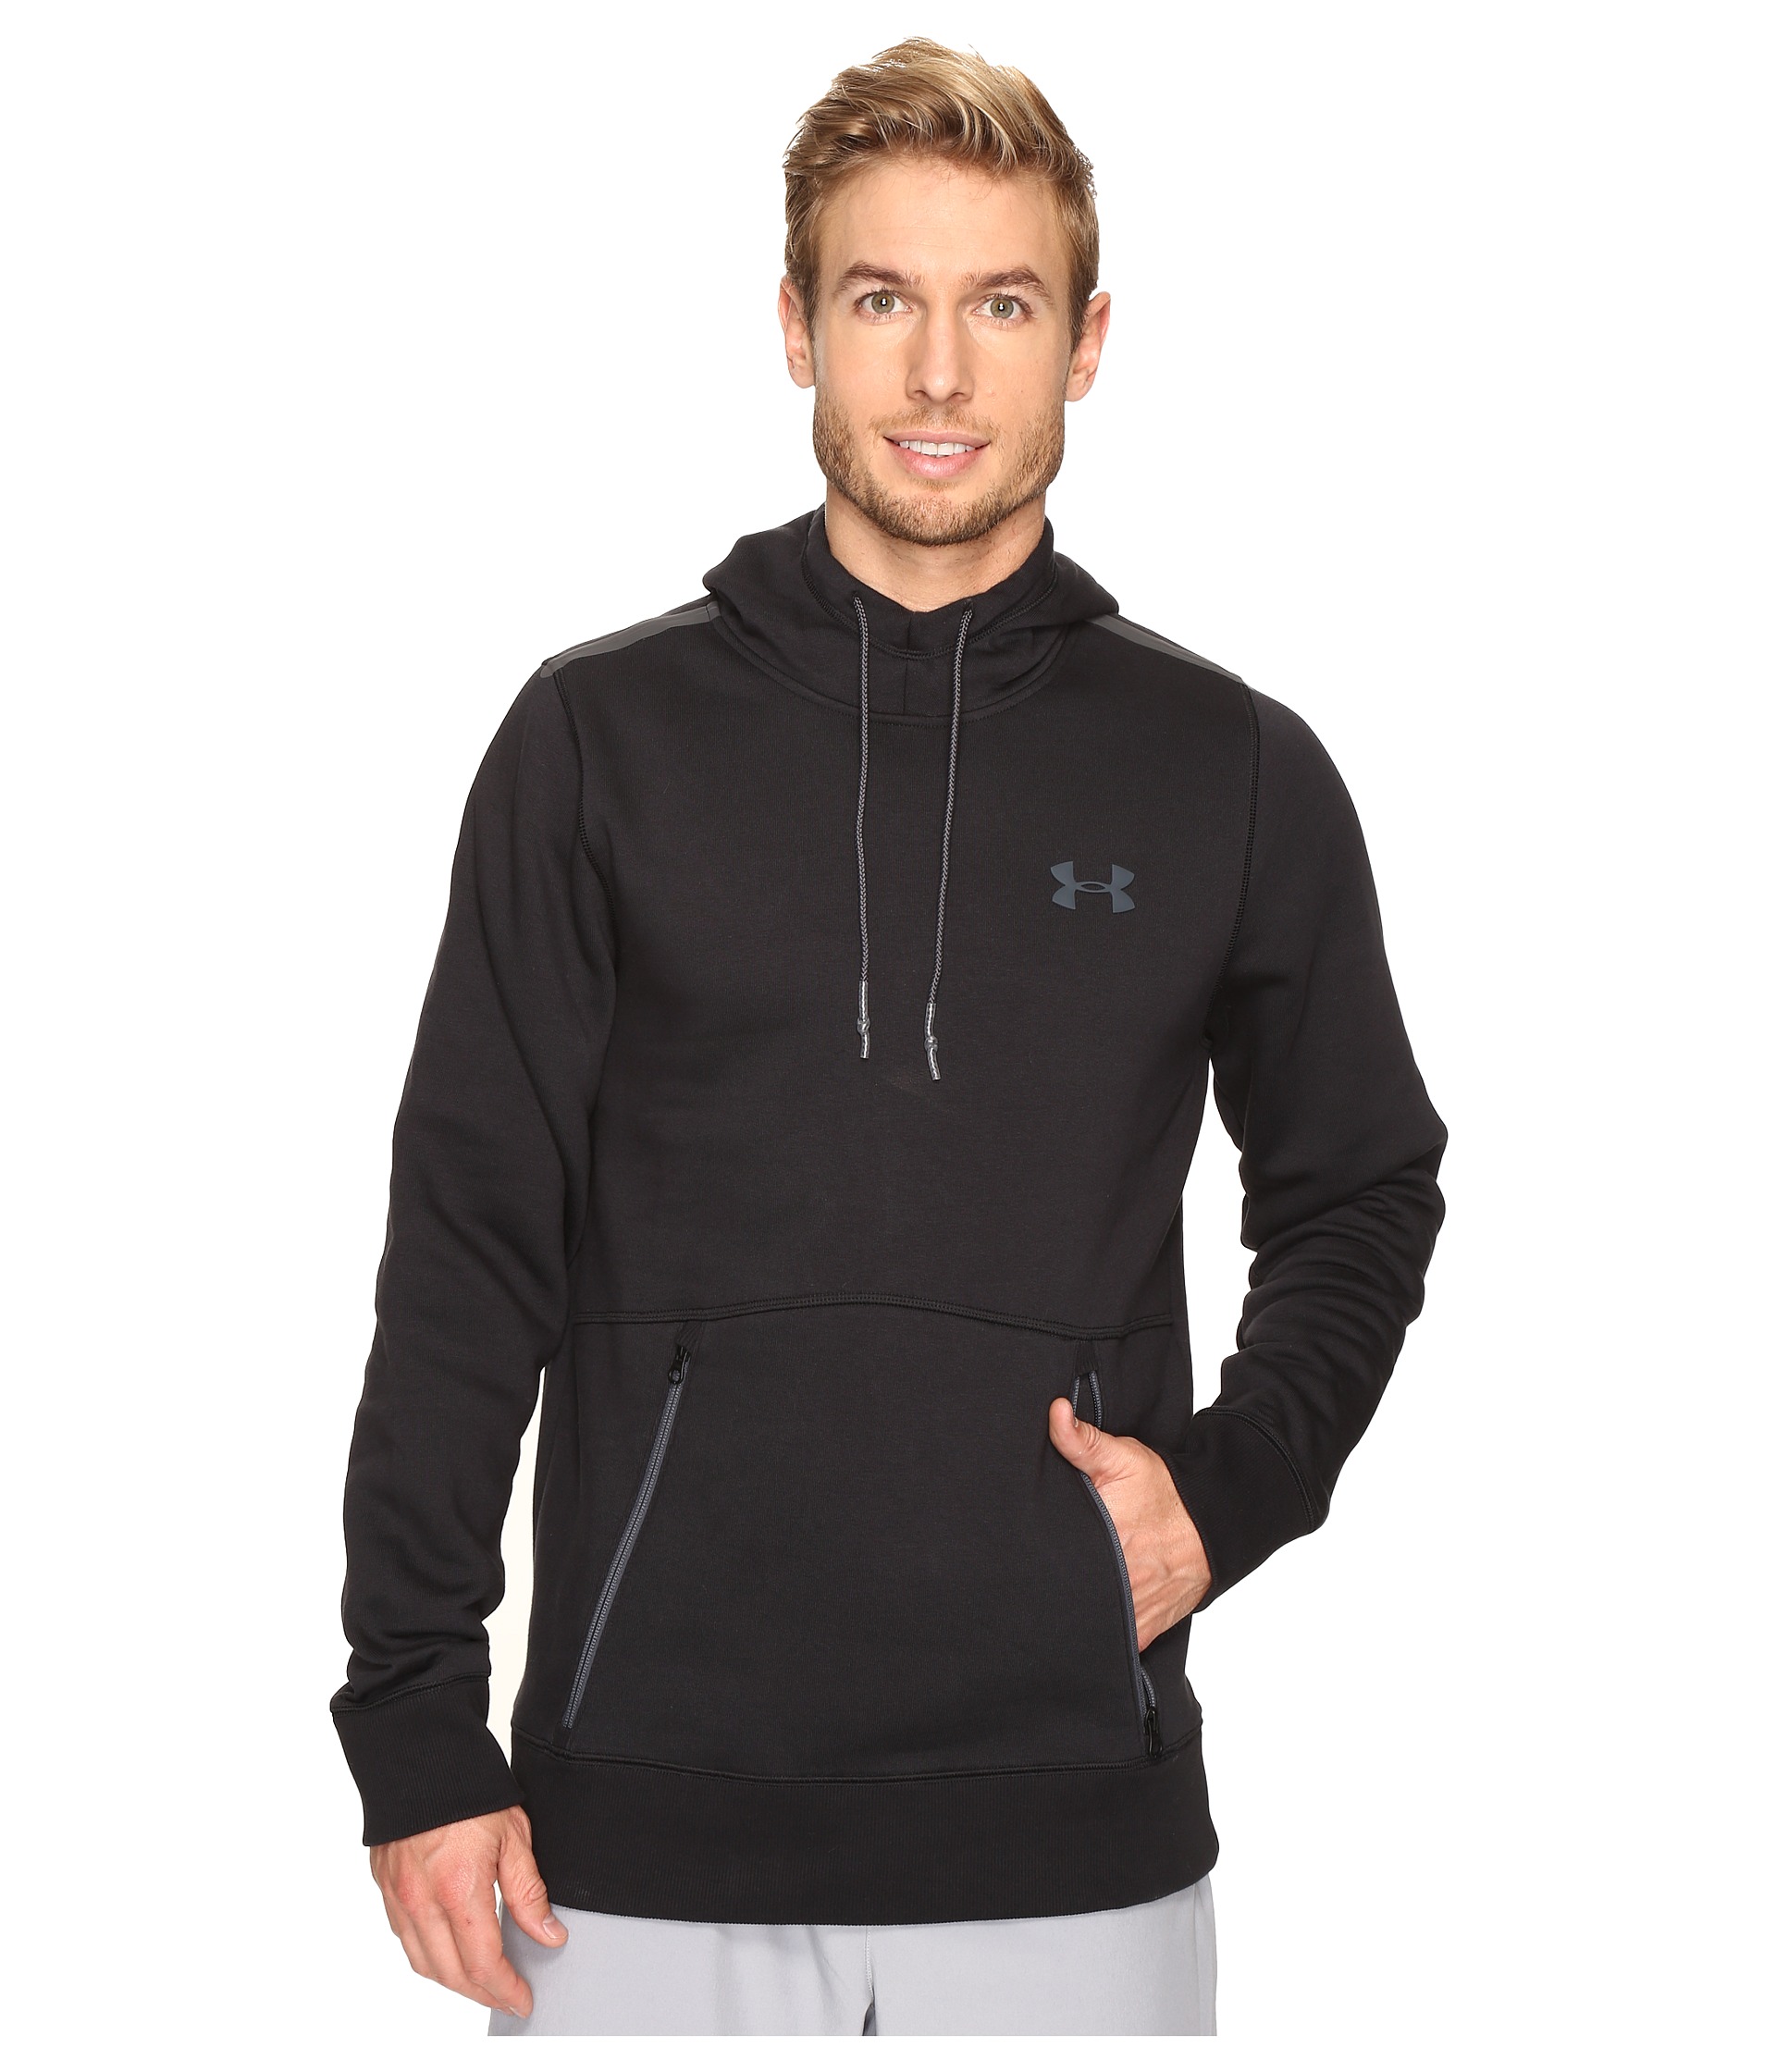 Under Armour Varsity Pullover Hoodie - Zappos.com Free Shipping BOTH Ways